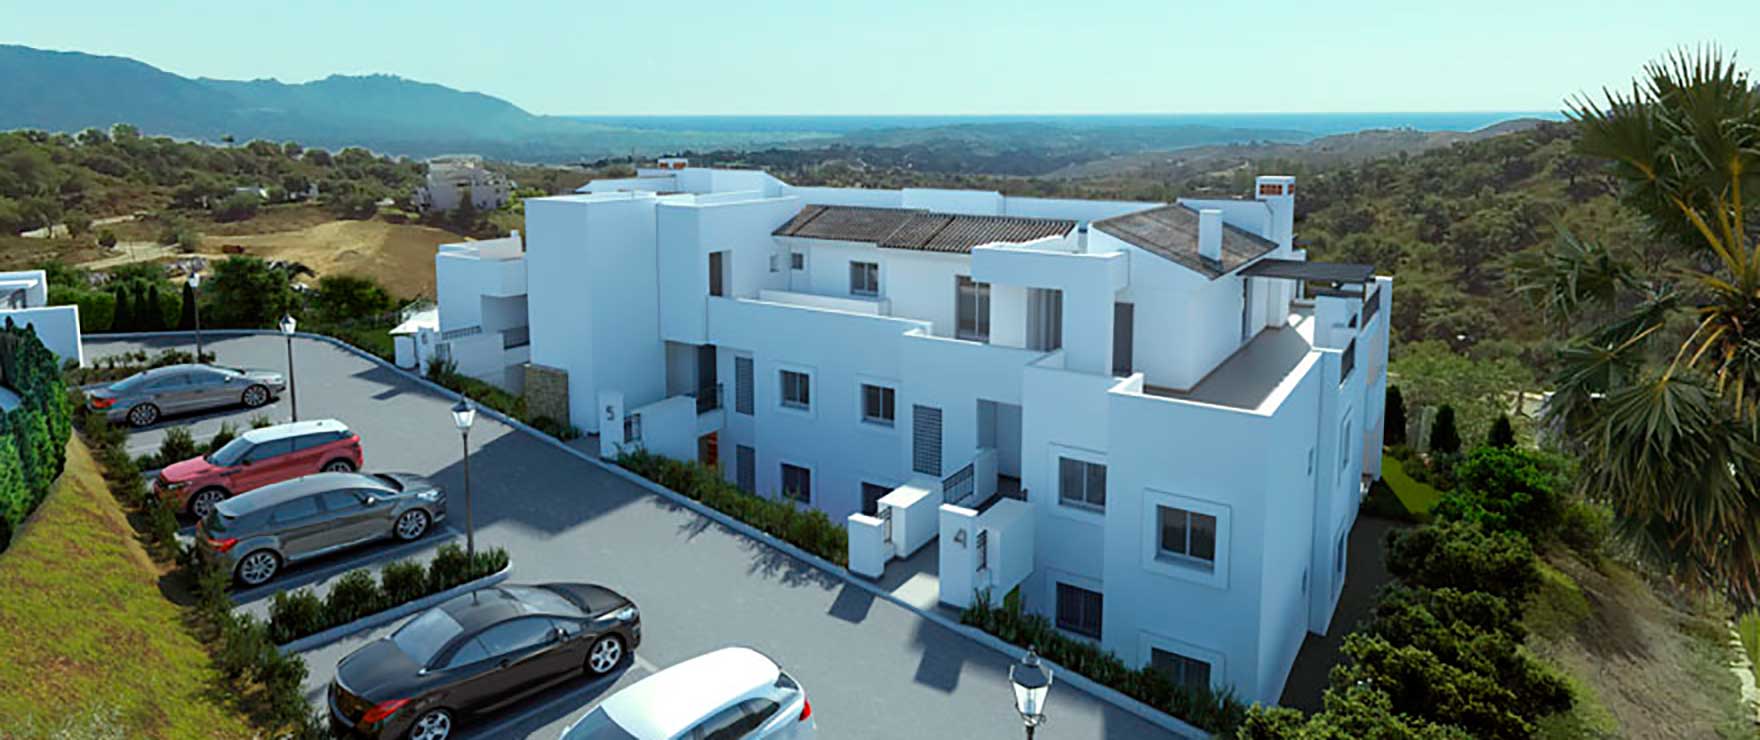 New development of 2 and 3 bedroom apartments for sale in La Floresta Sur, one of the best locations in Costa del Sol